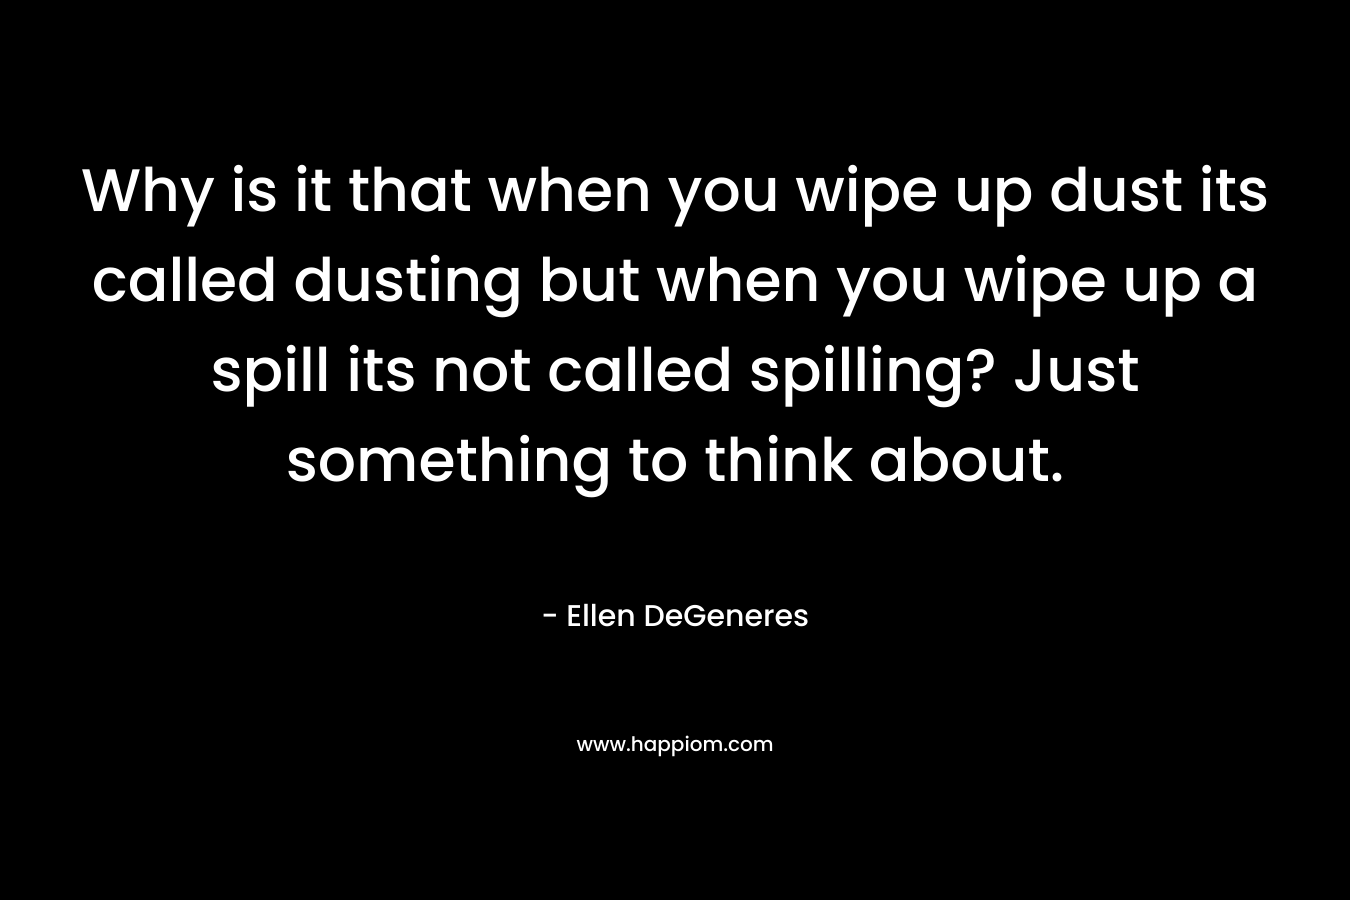 Why is it that when you wipe up dust its called dusting but when you wipe up a spill its not called spilling? Just something to think about. – Ellen DeGeneres